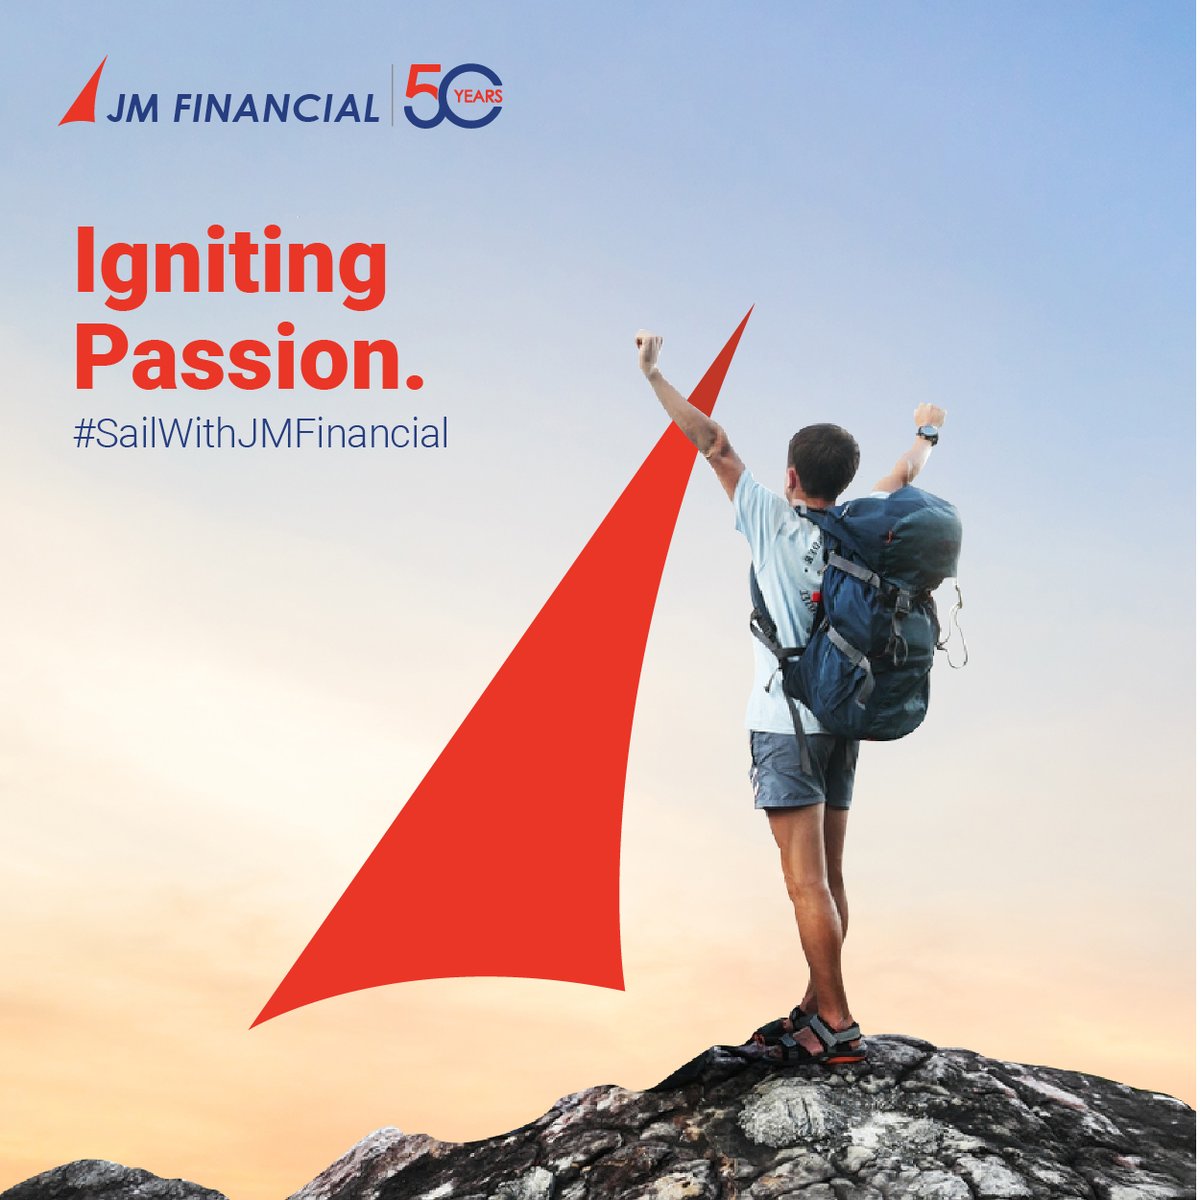 Give your dreams the Power of Passion 

#JMFinancial #50yearsofJMFinancial #SailWithJMFinancial